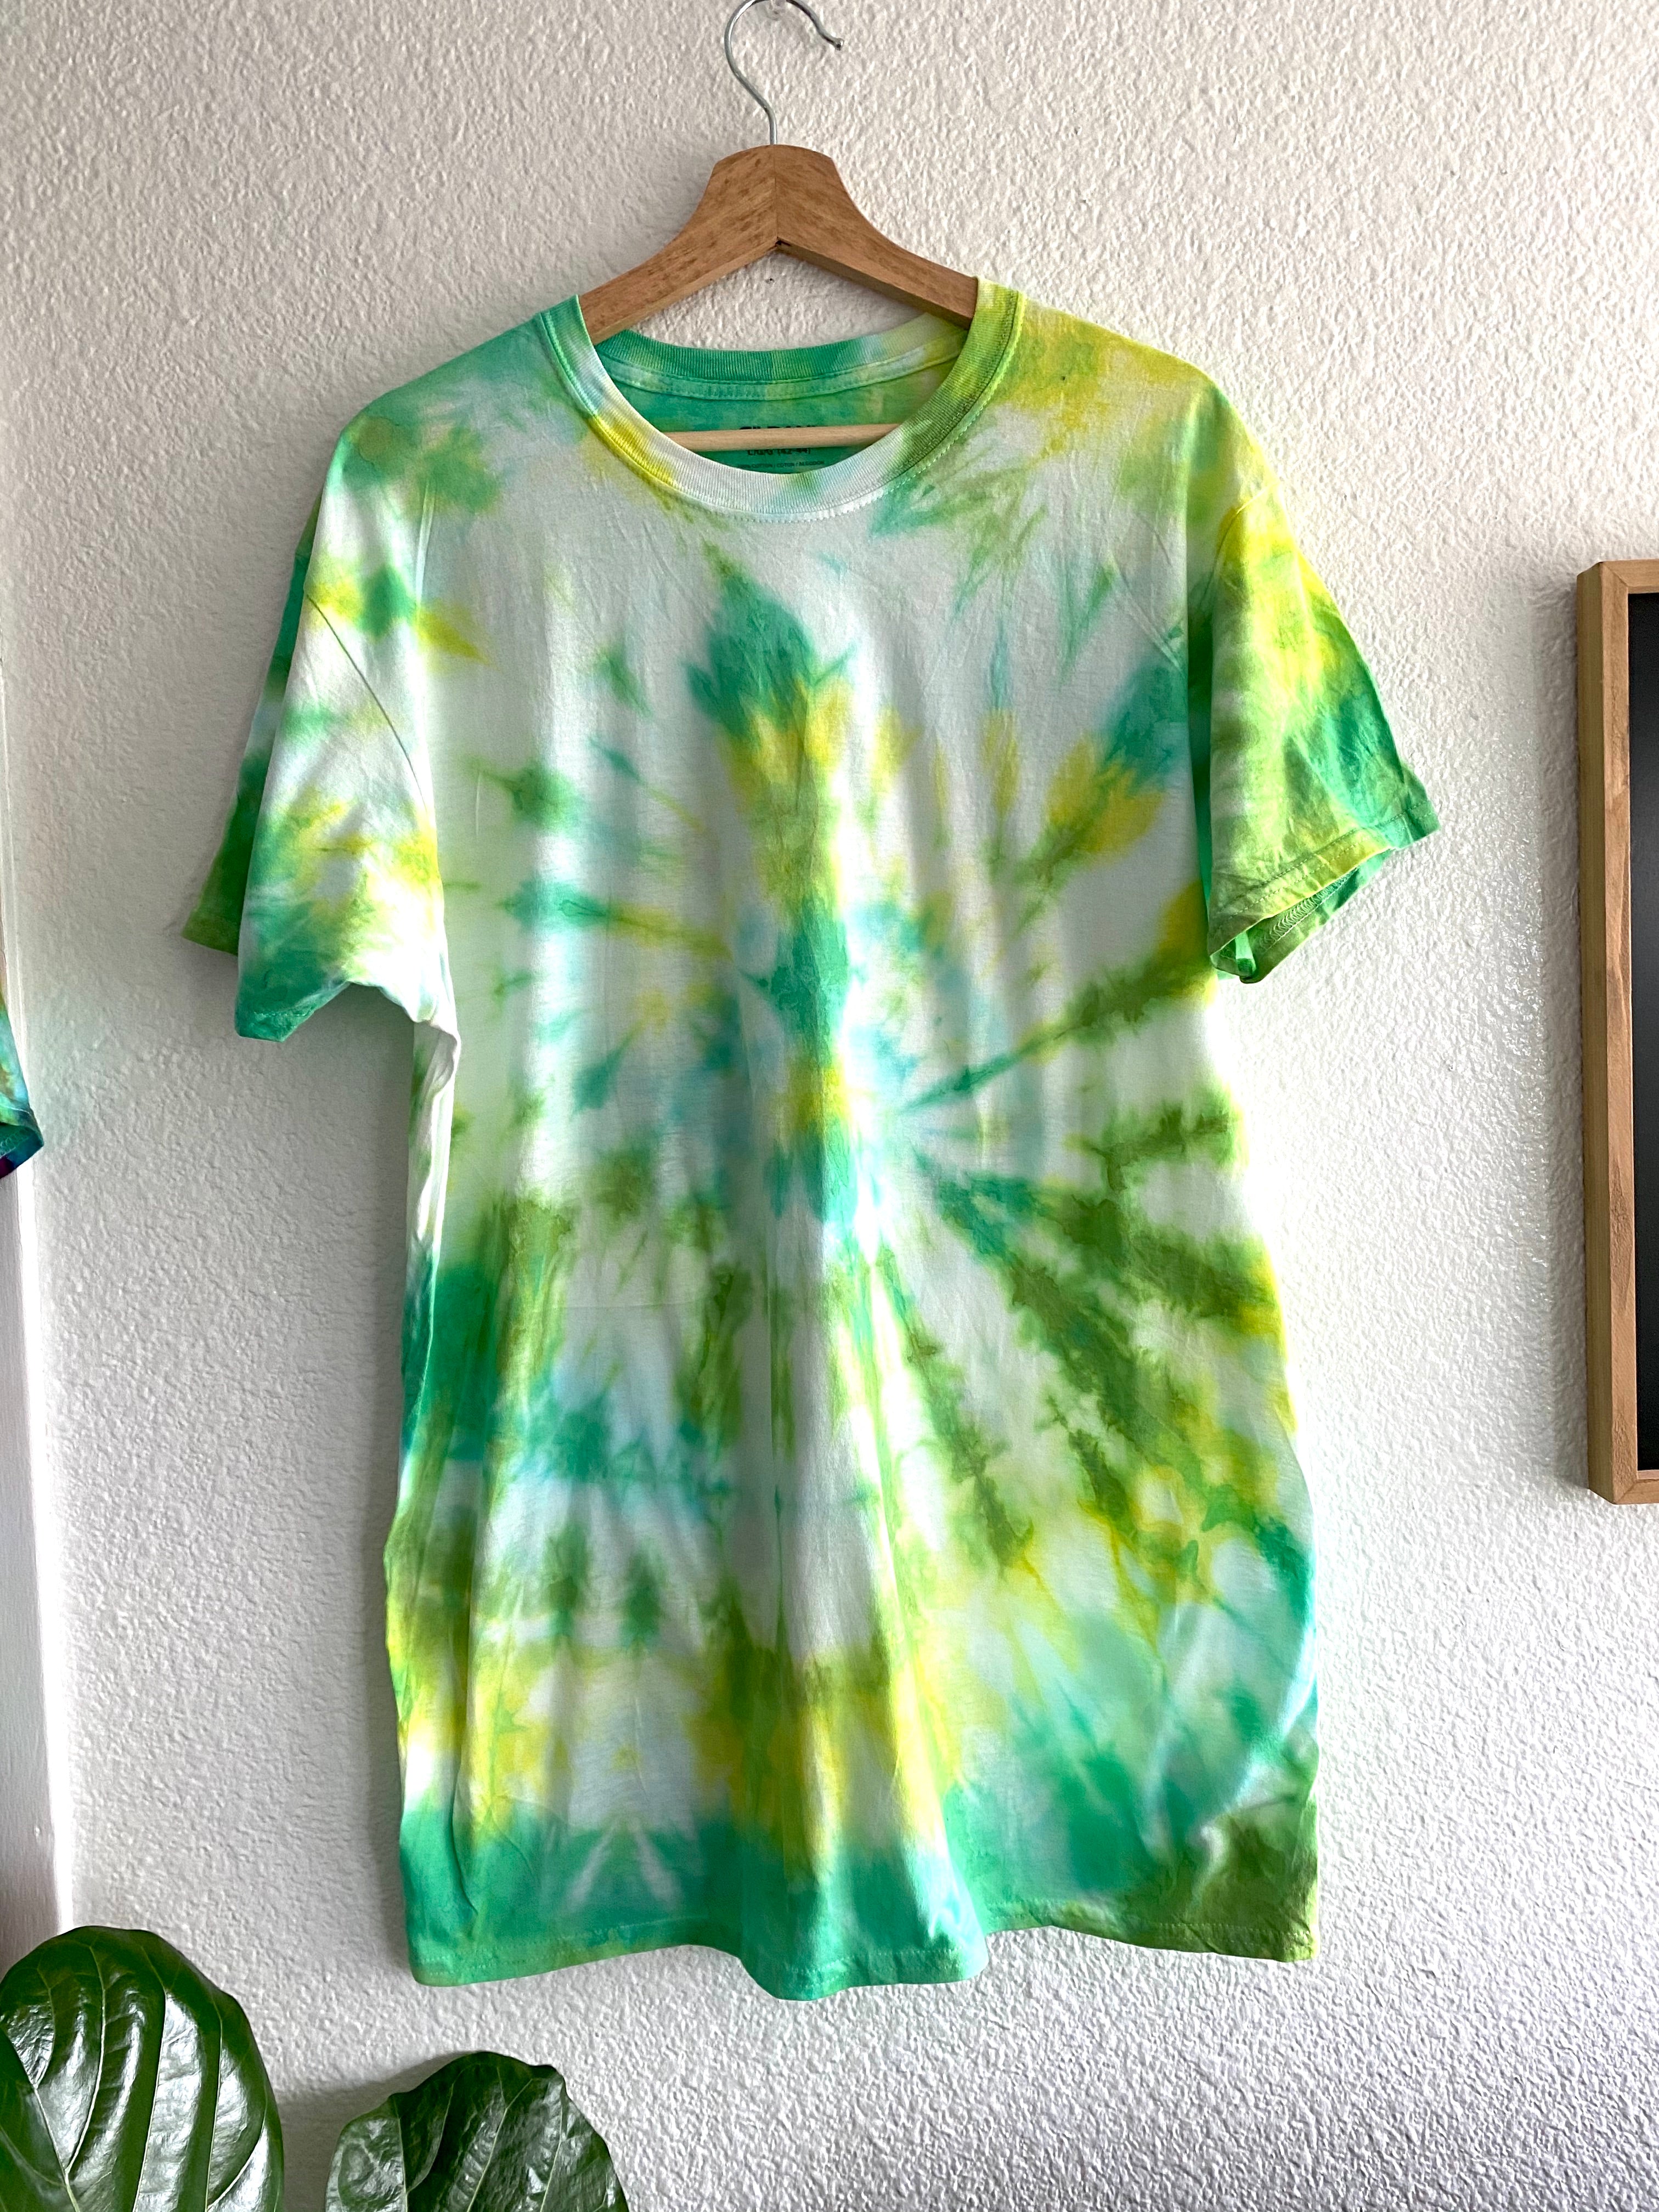 Pacific Rayne | Tie Dye T-Shirts, T-Shirts, Pacific Rayne, Defiance Outdoor Gear Co.